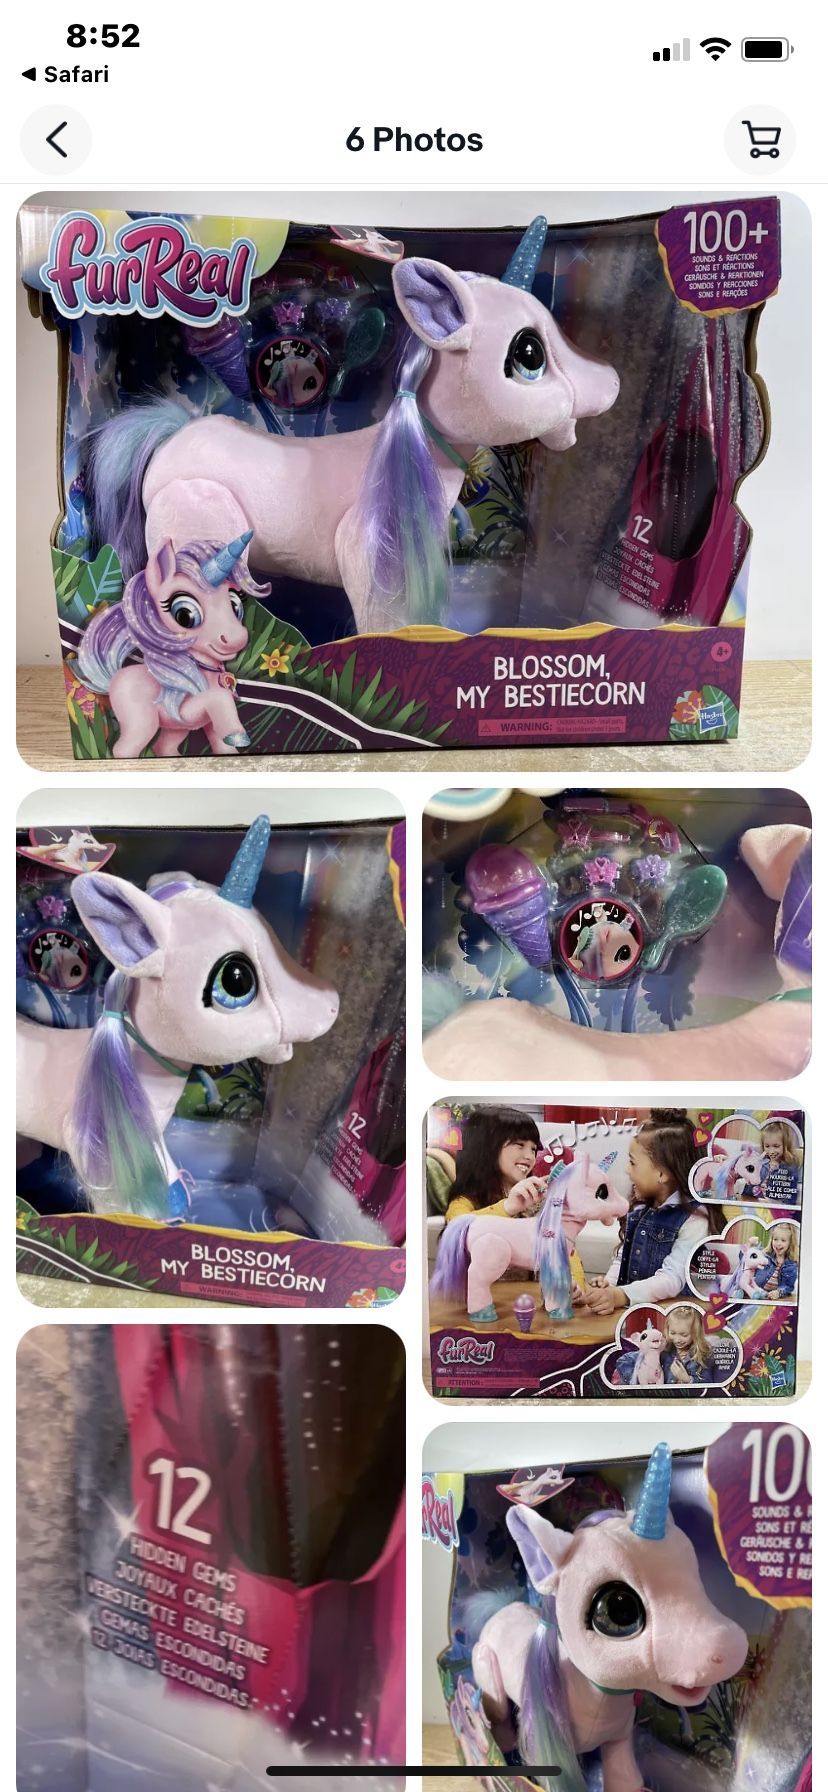 FurReal friend  My Bestiecorn Interactive Plush Pet Toy, 100+ Sounds & Reactions, Ages 4 and Up 	•	SUCH A FANTASTICAL BFF! The furReal Blossom My Best